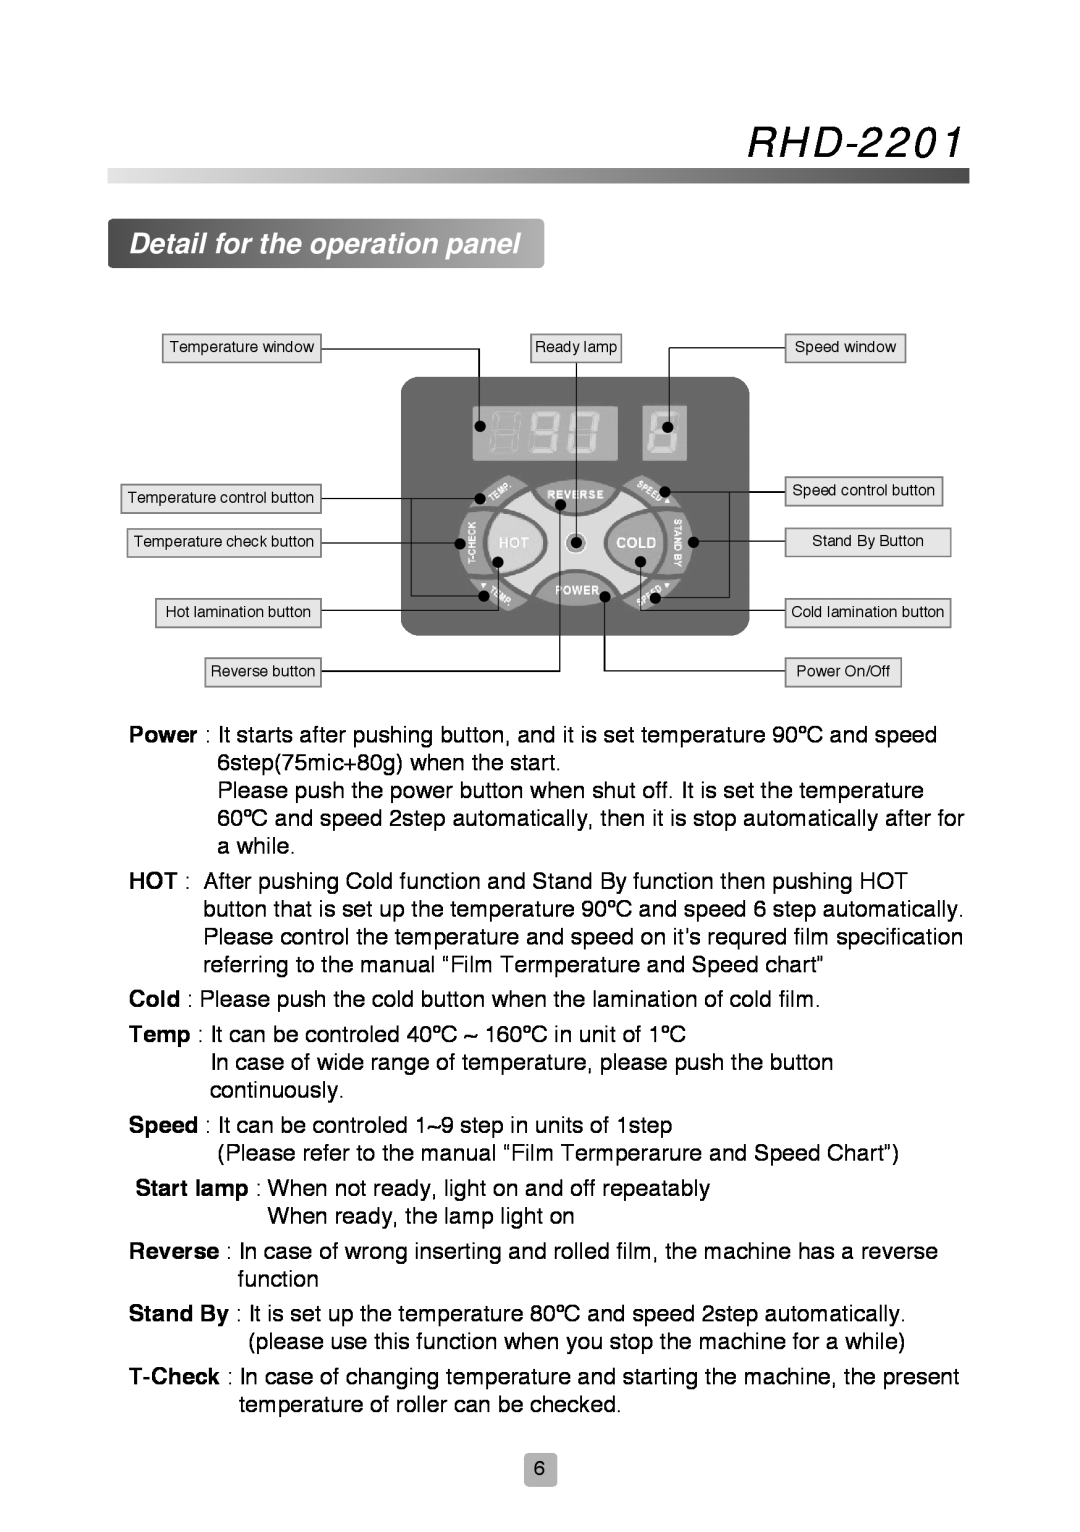 Royal Sovereign RHD-2201 owner manual Detail for the operation panel 